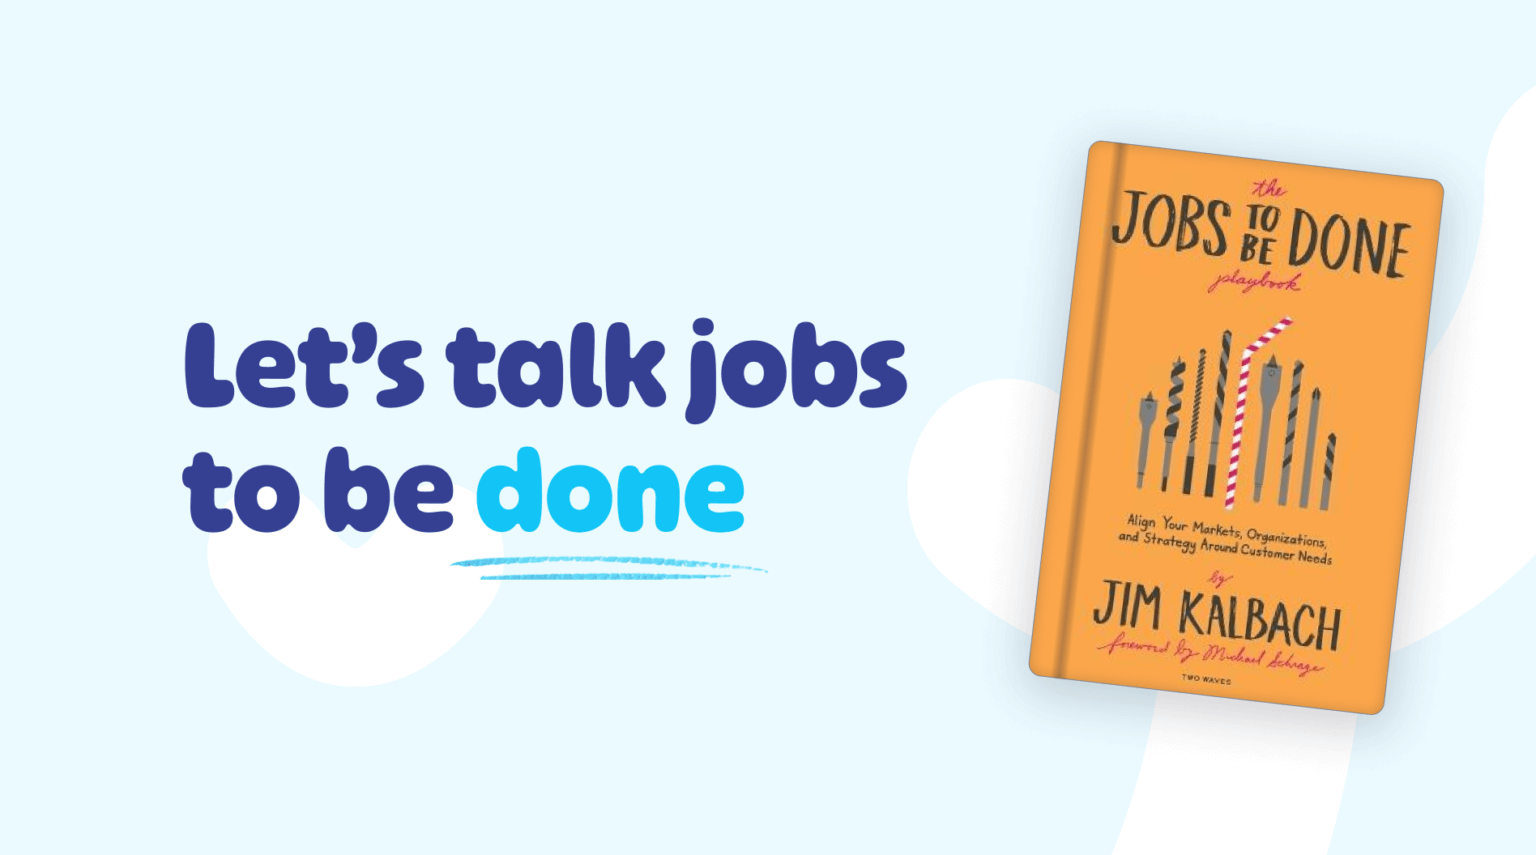 A book titled "Let's Talk Jobs to Be Done" focuses on procedures and knowledge.